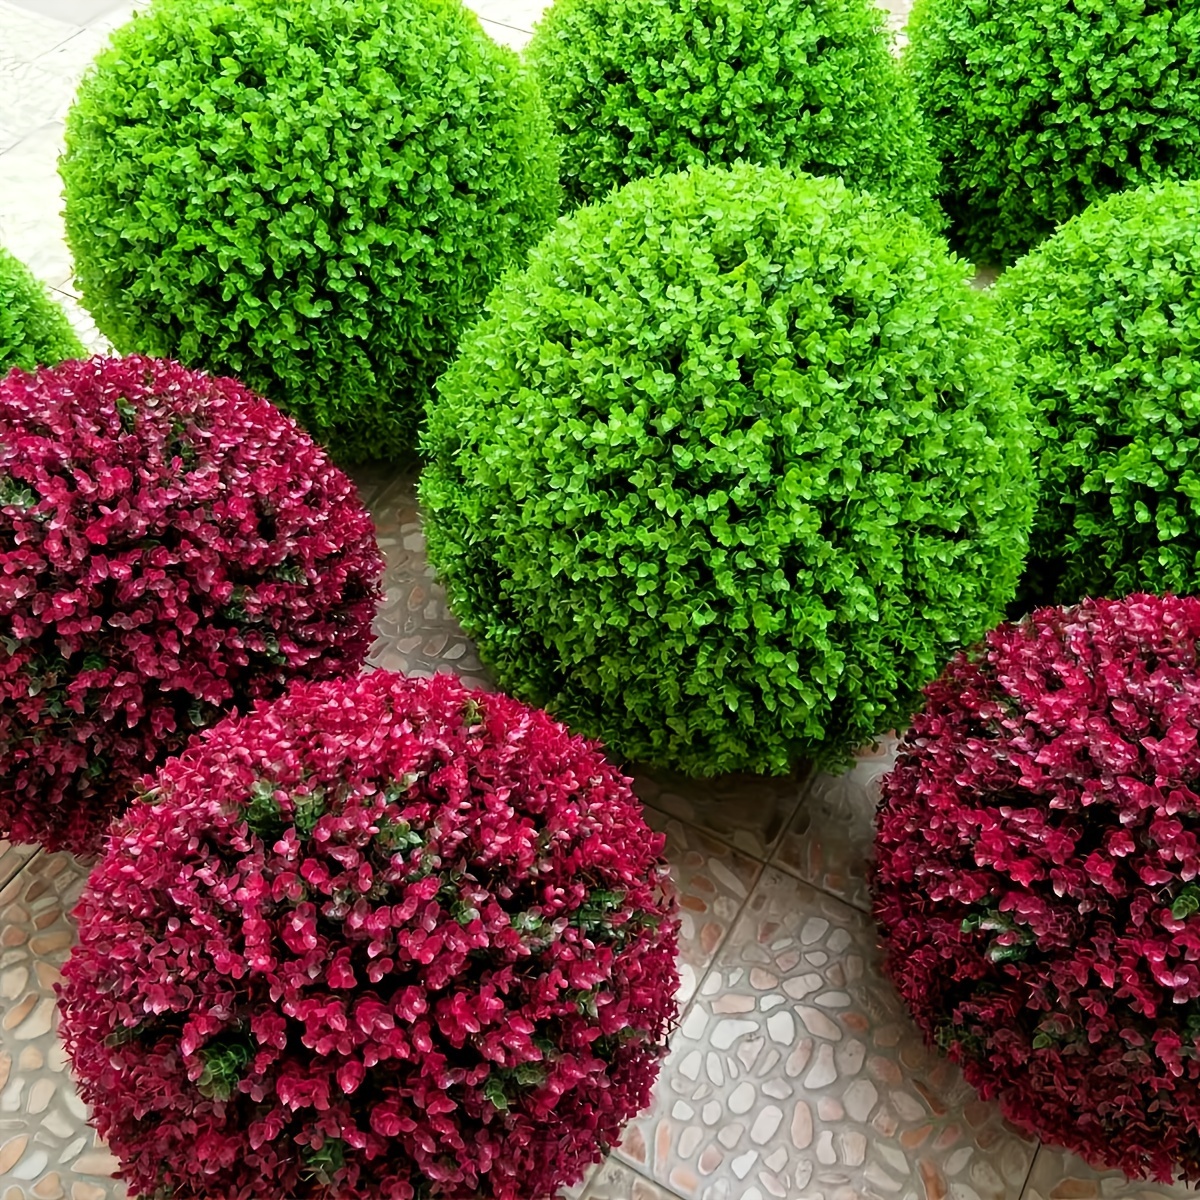 2packs artificial plant boxwood topiary balls uv protected faux plants decorative balls for outdoor patio garden balcony backyard and indoor home wedding decoration